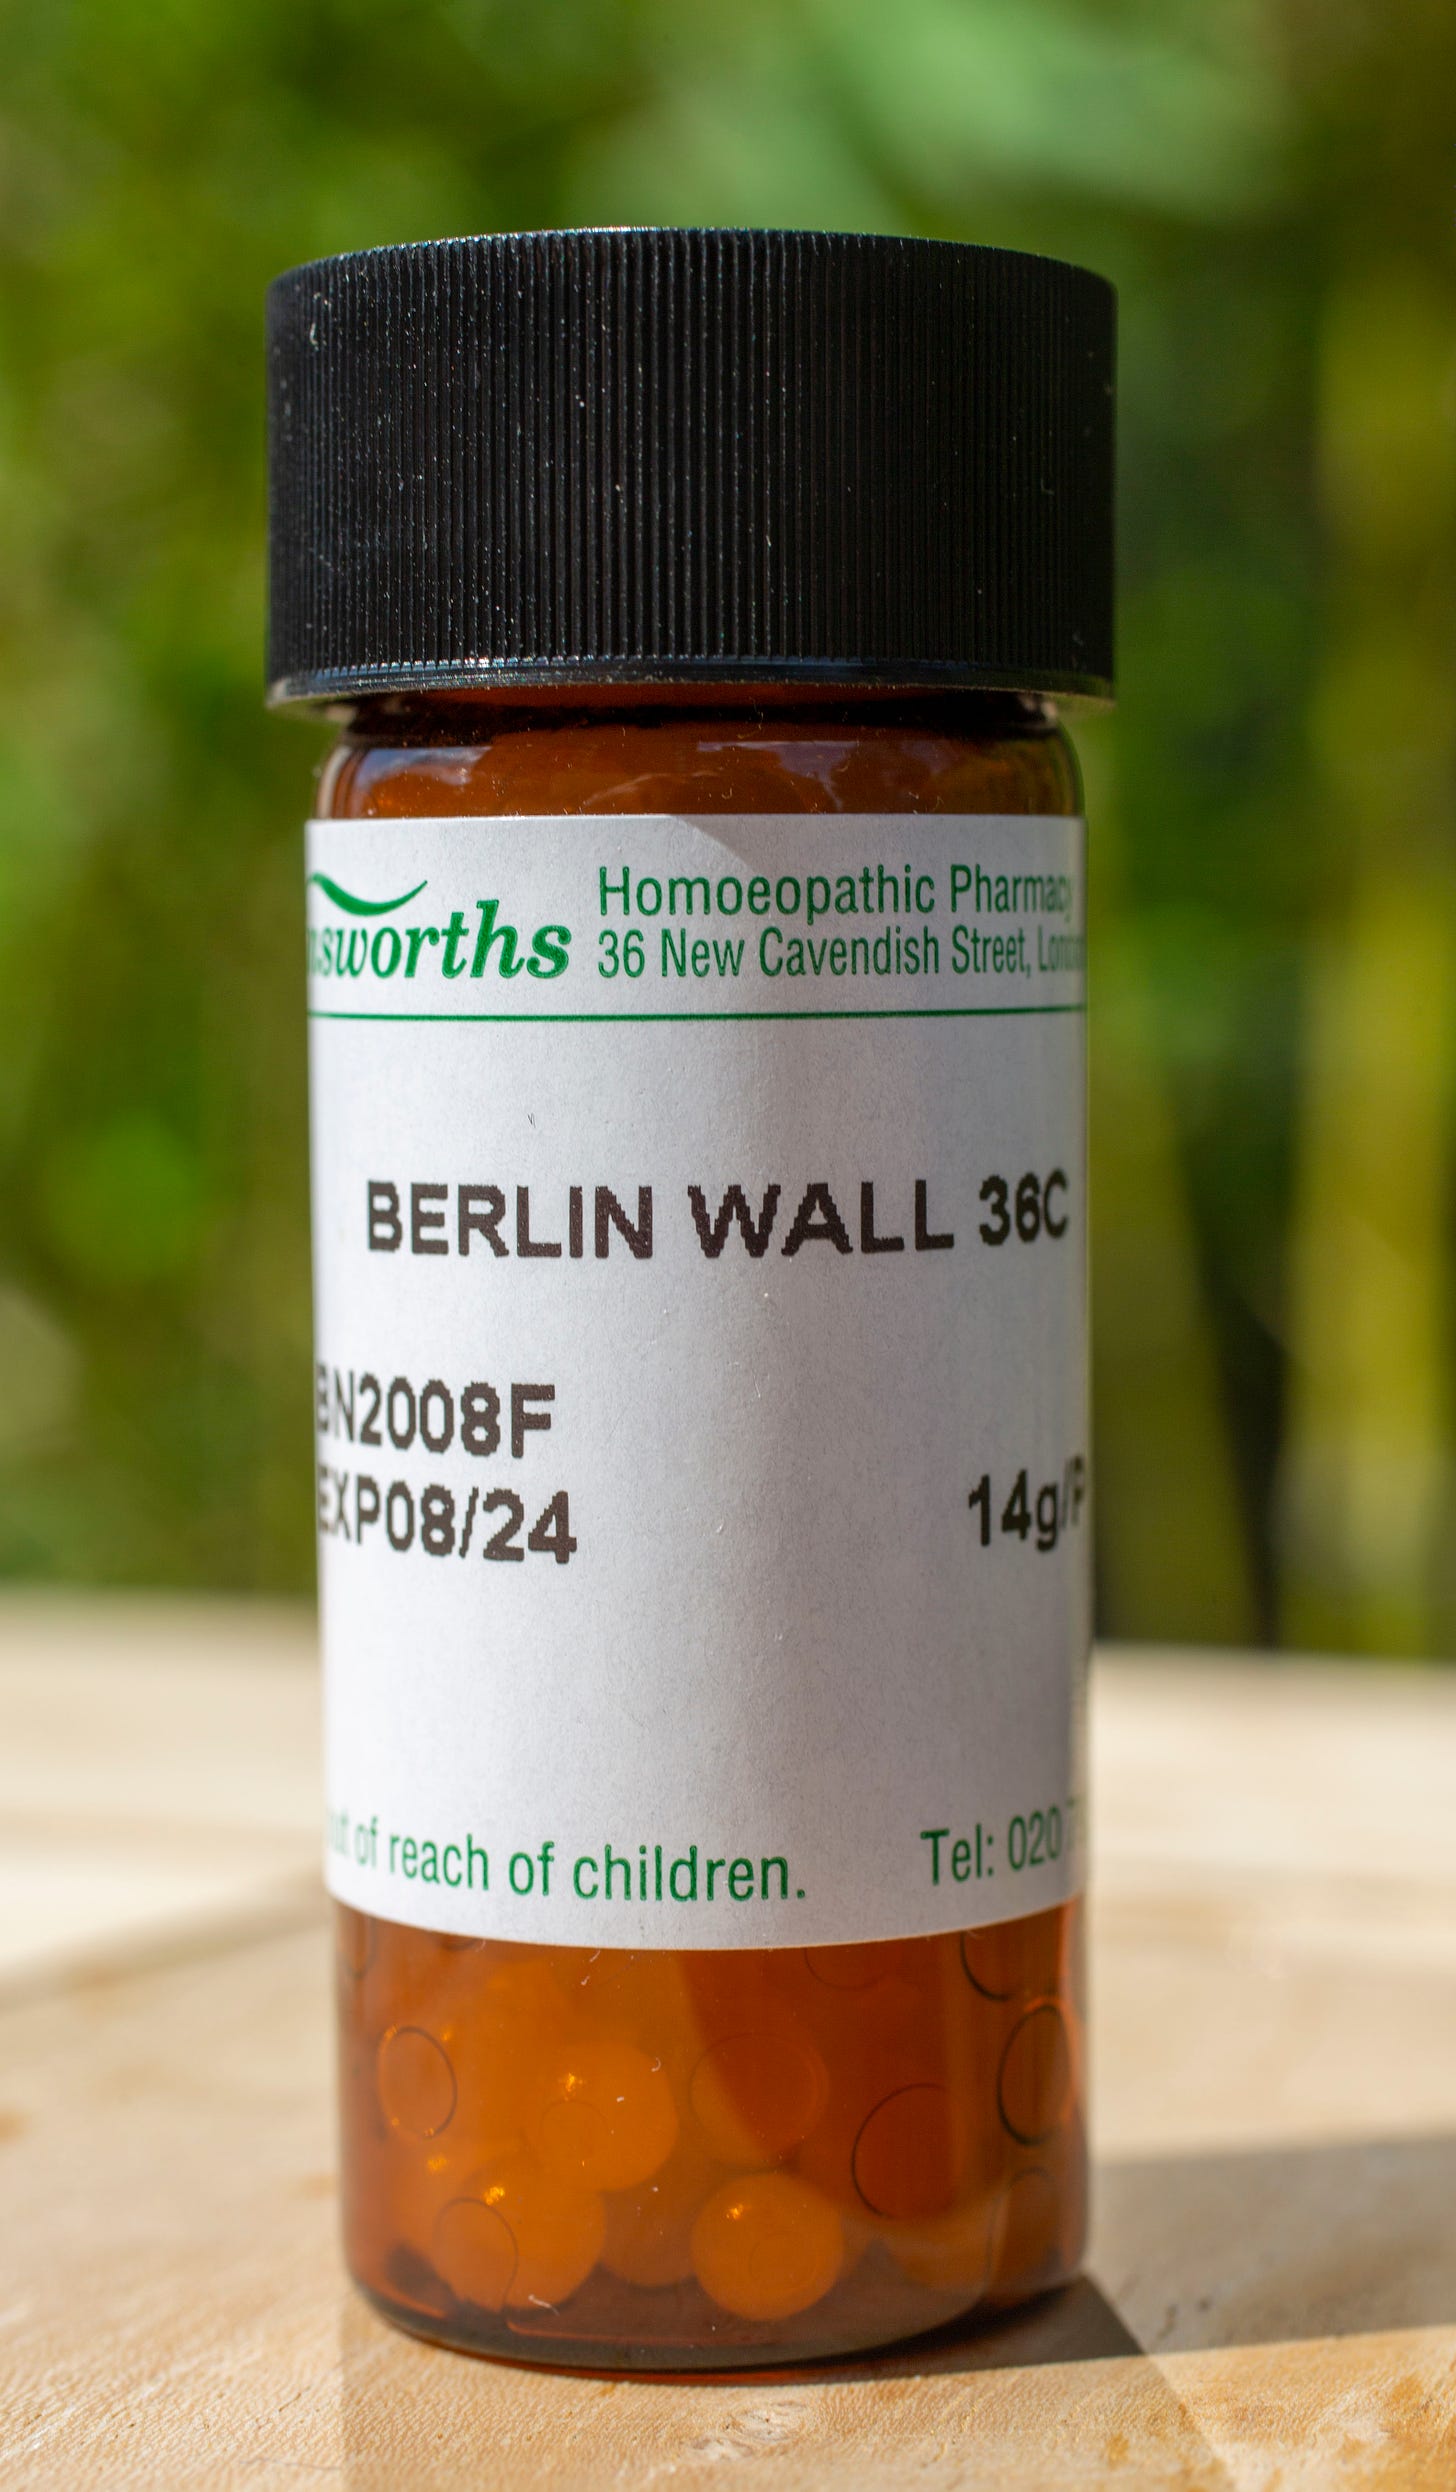 Pharmacy used by the Queen is selling pills made of Berlin Wall 'that boost  relationships and break down emotional barriers' – The Sun | The Sun